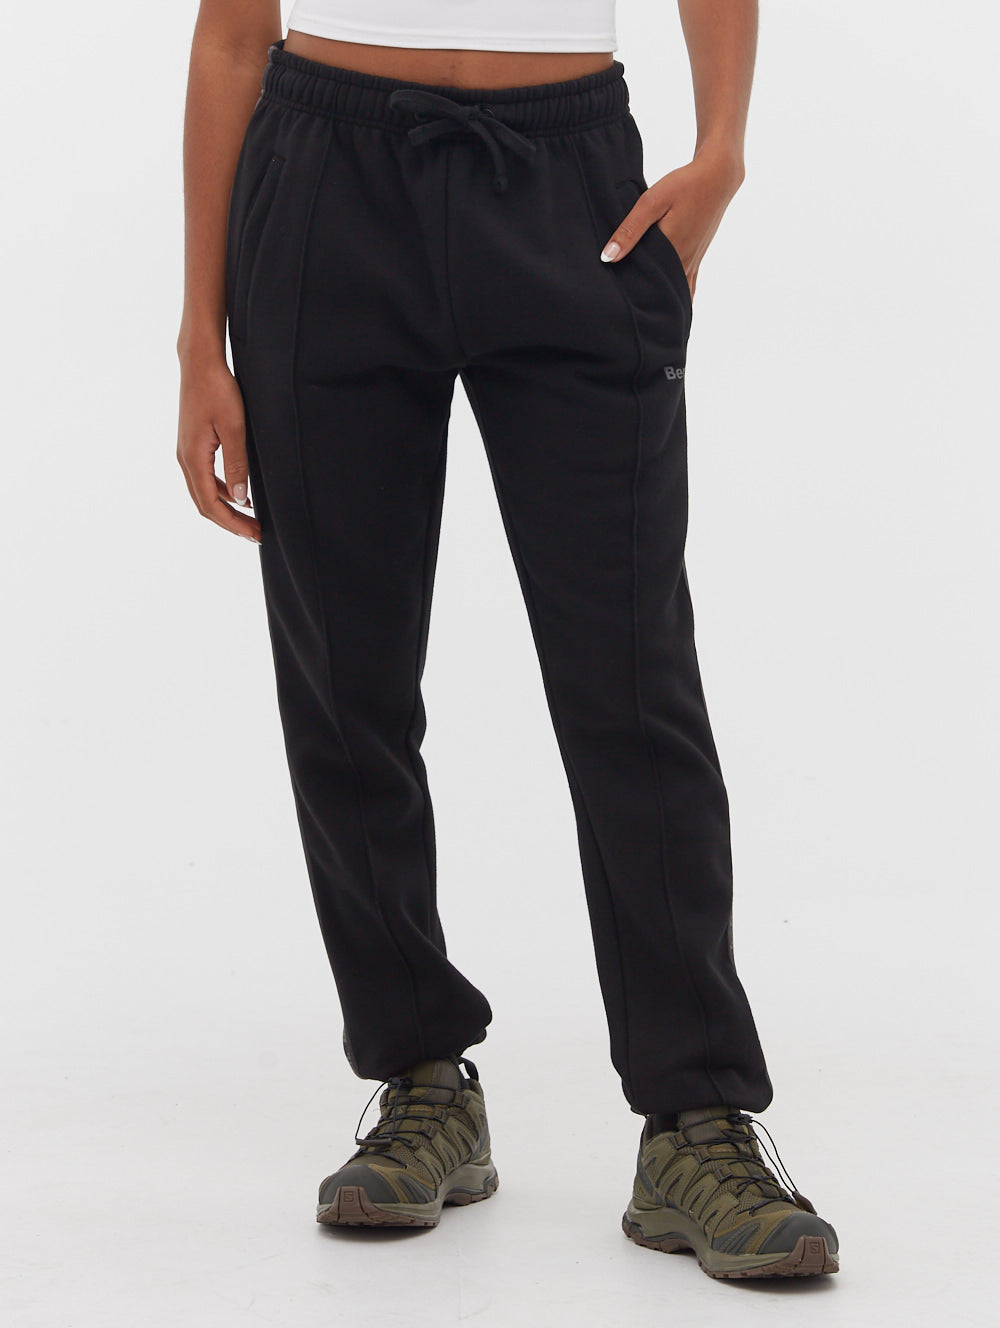 Women's Spalding Sport Pants gifts - at $23.31+